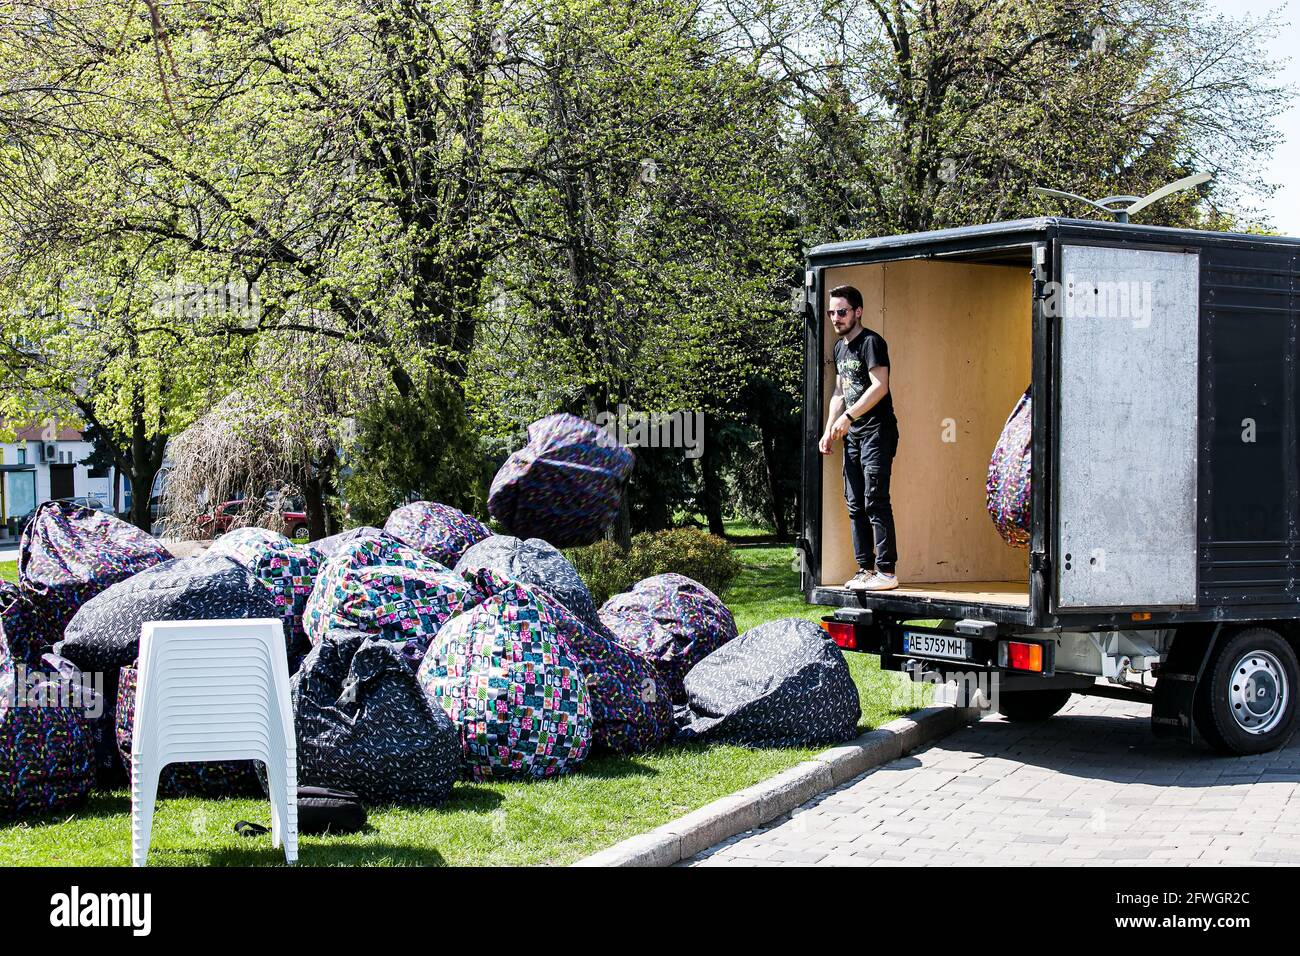 Dnepropetrovsk, Ukraine - 01.05.2021: preparing the summer cafe for the season. Unloading soft outdoor seat-chairs. Stock Photo